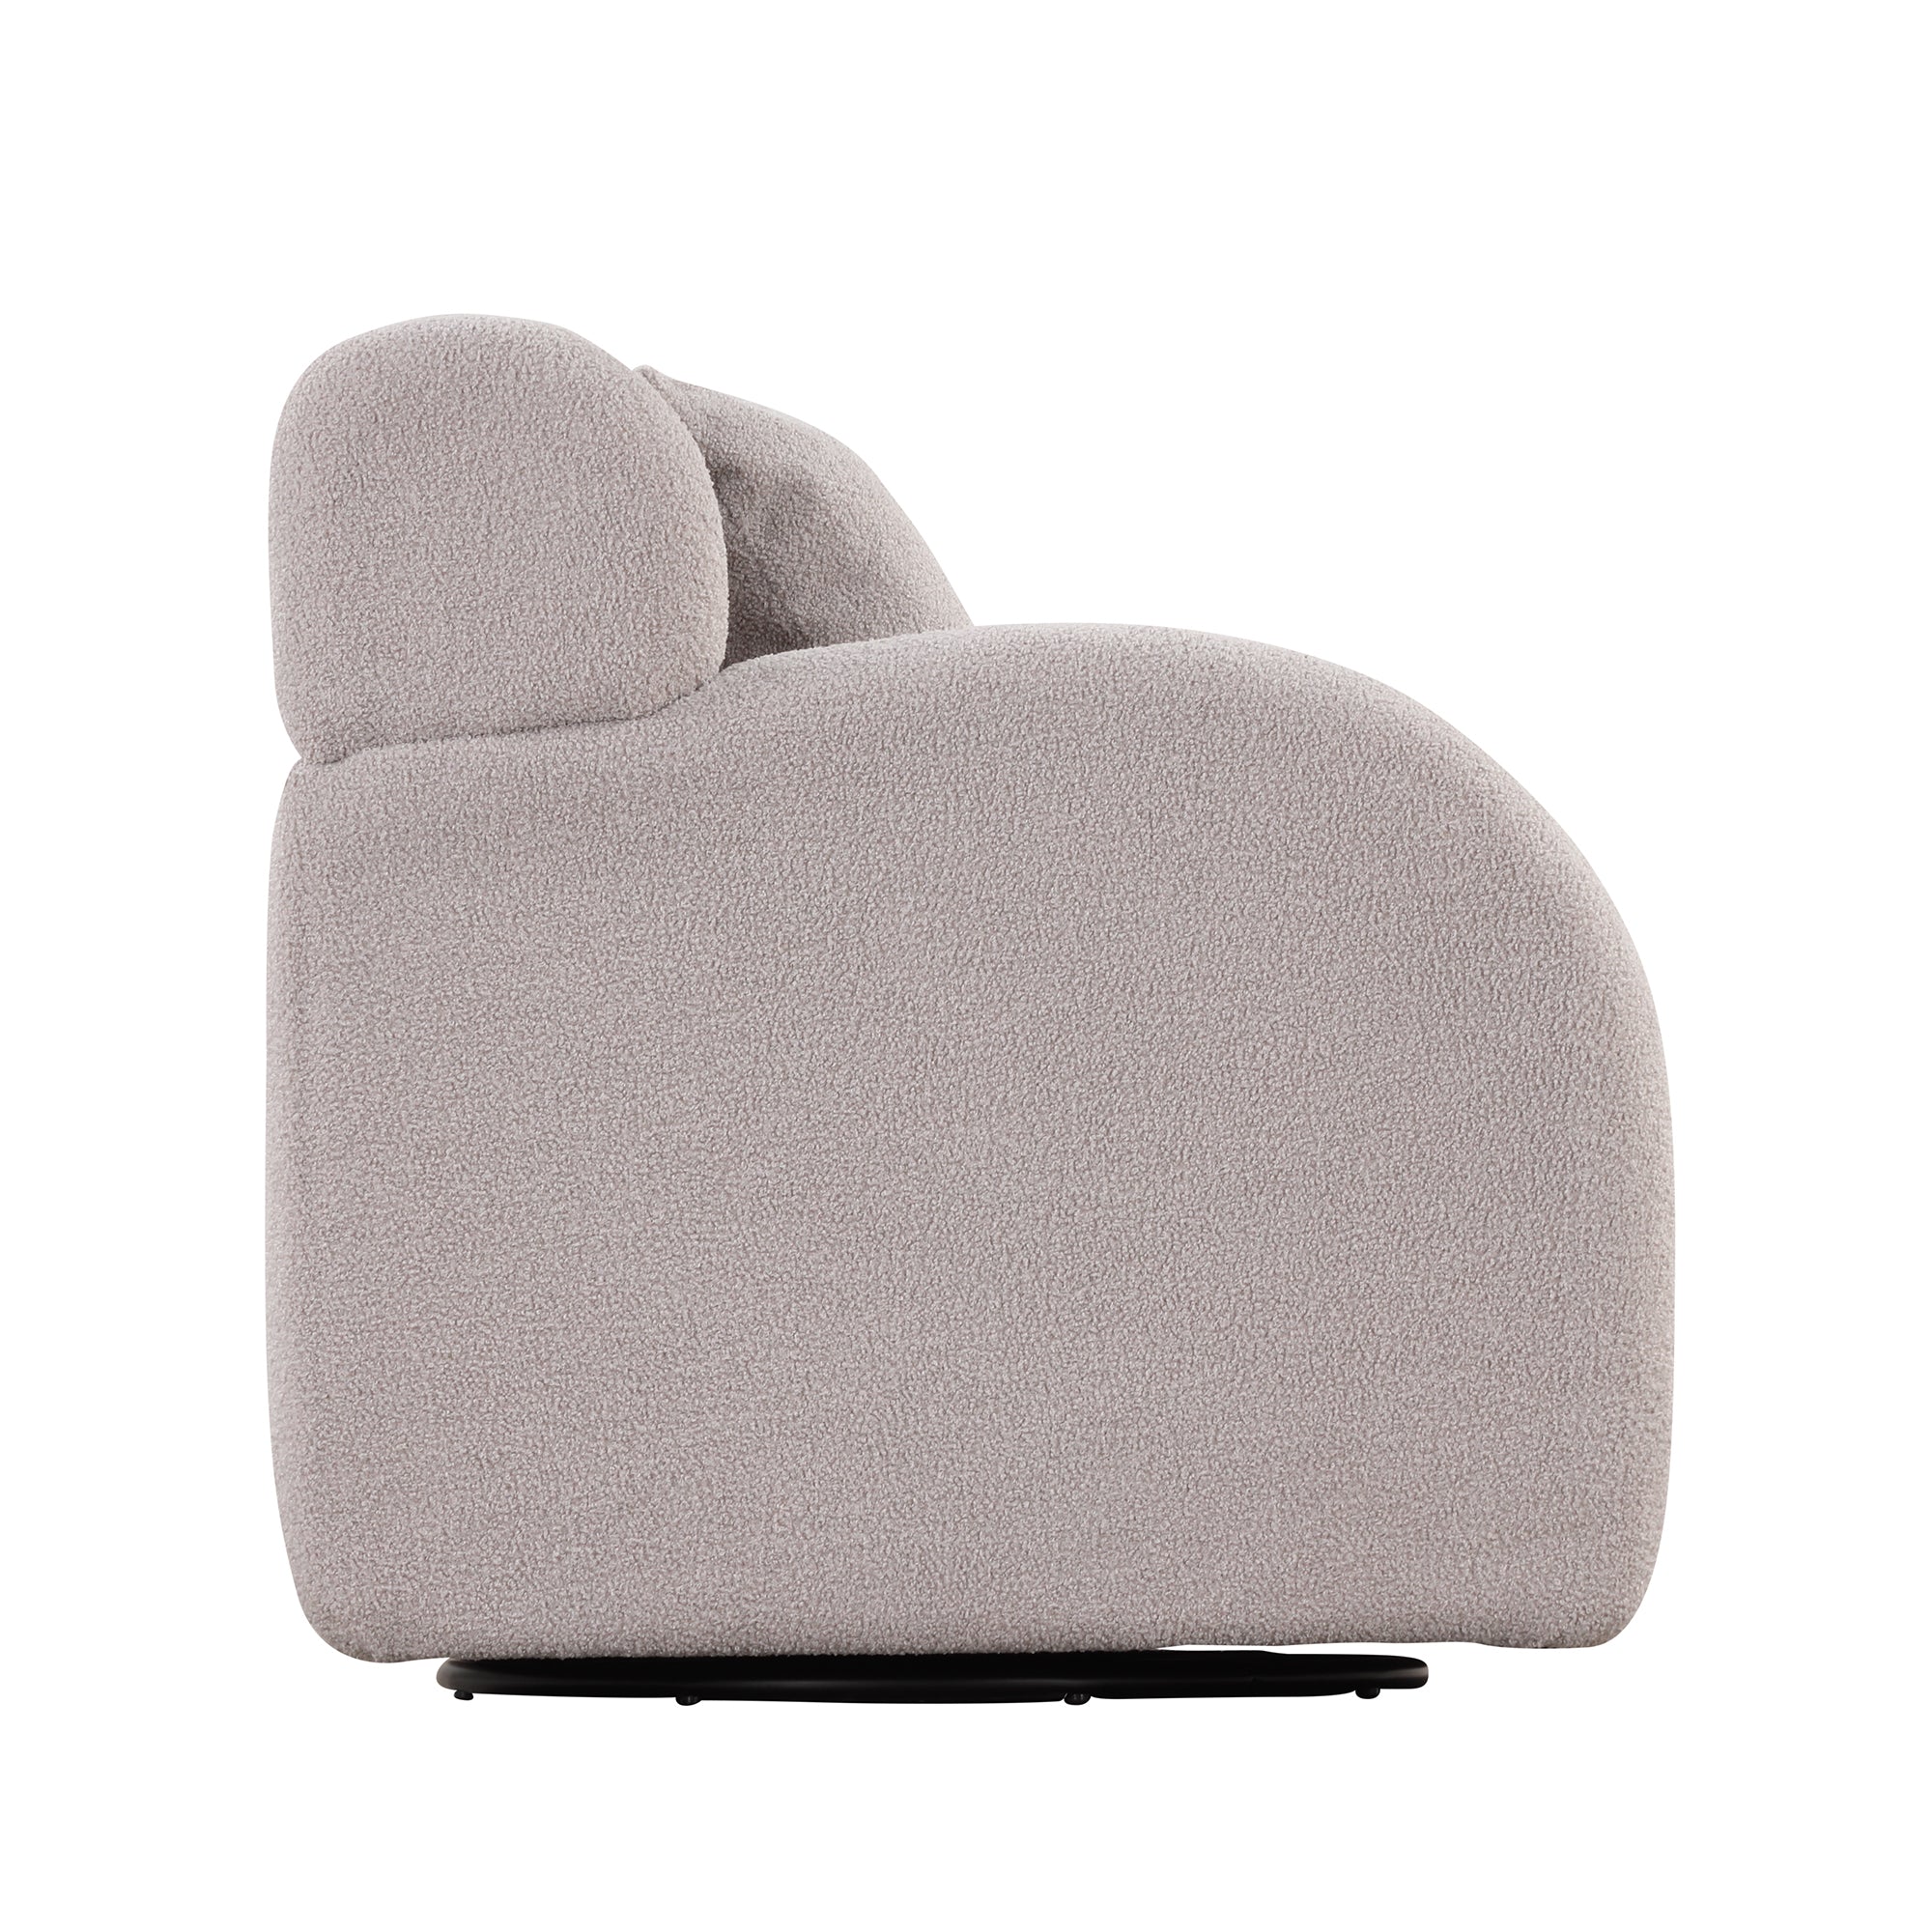 ZNTS Swivel Accent Chair with Ottoman, Teddy Short Plush Particle Velvet Armchair,360 Degree Swivel WF303390AAE